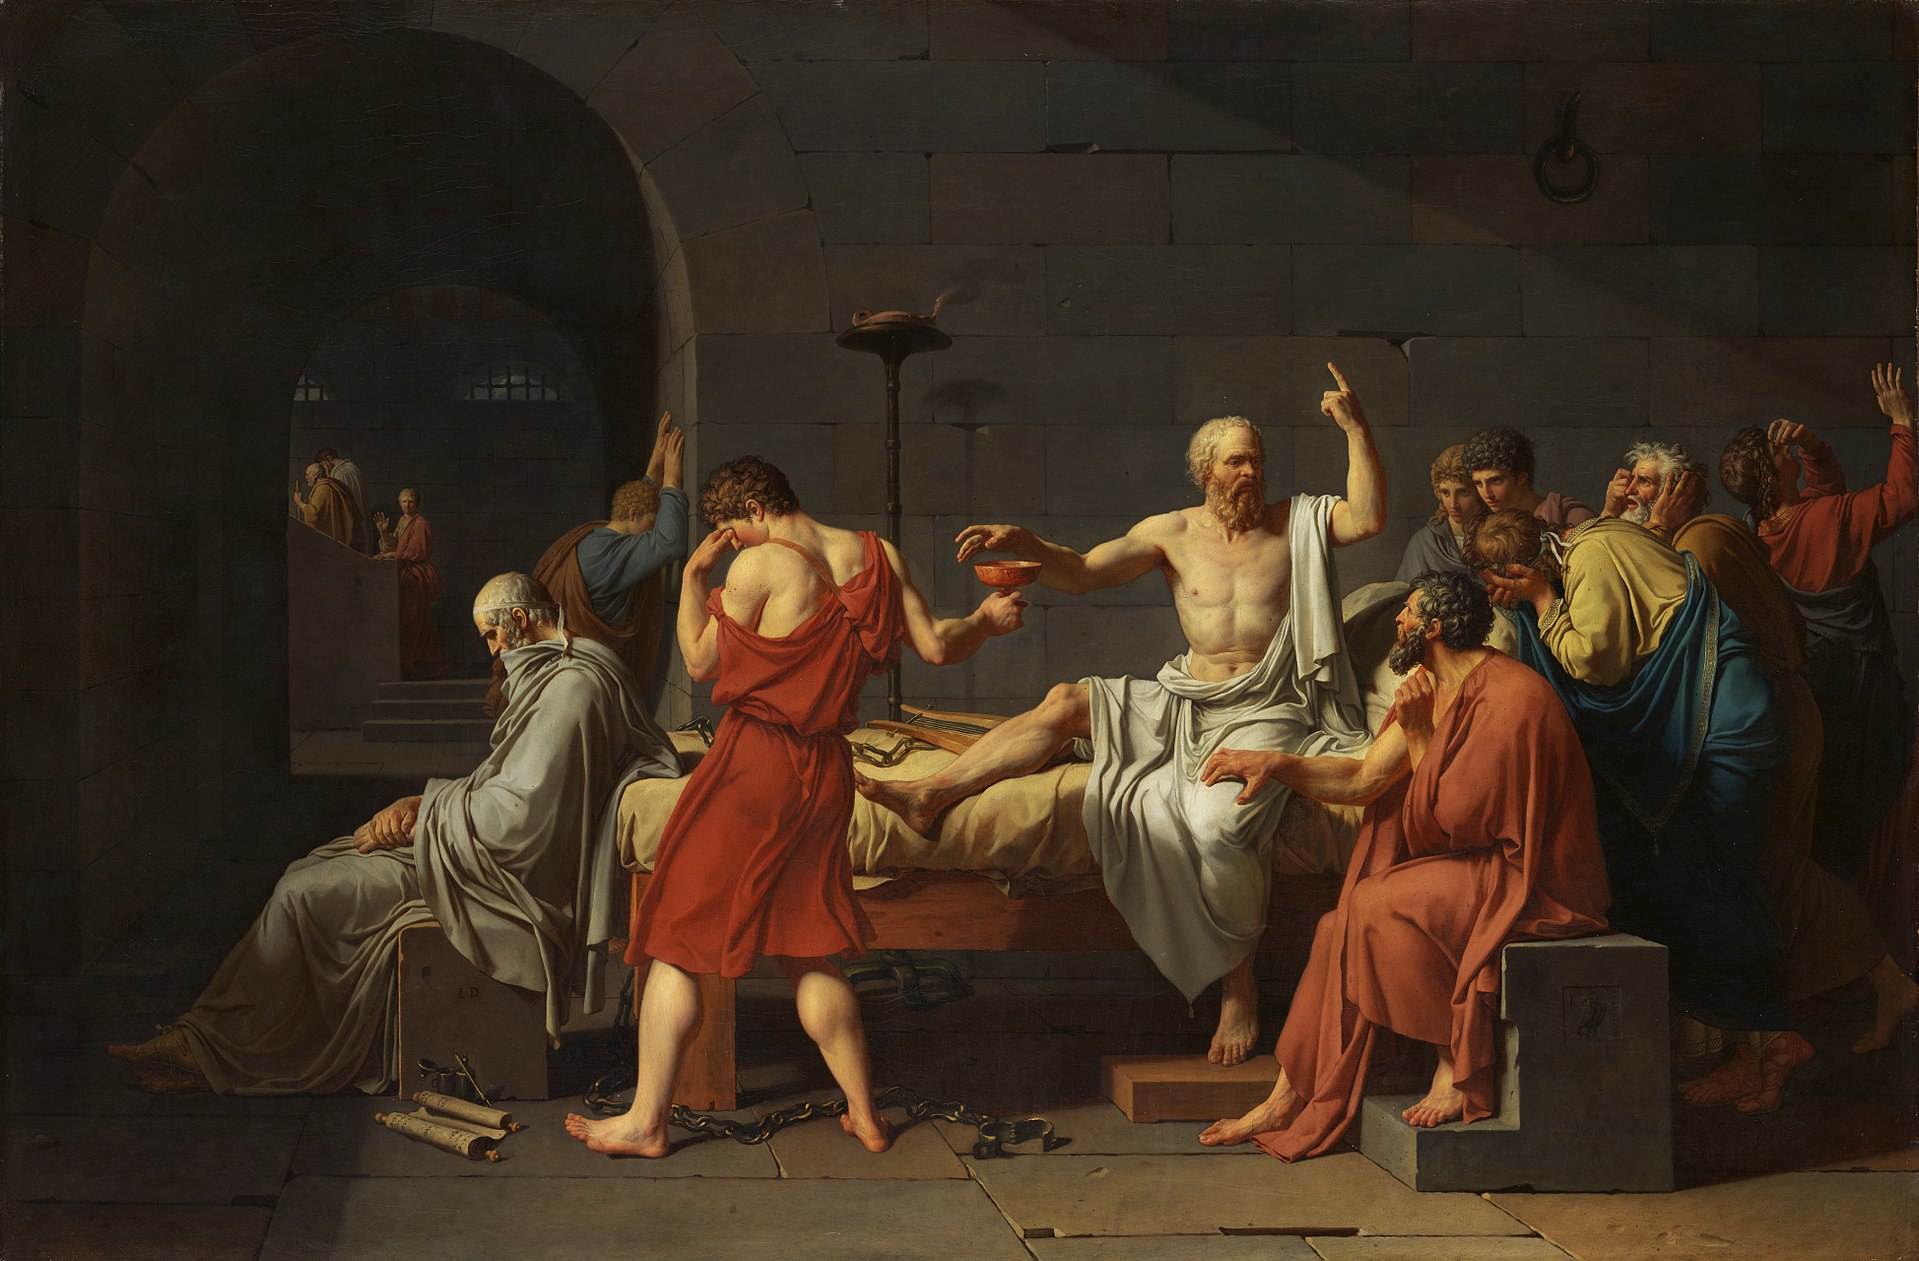 Jacques Louis David: The Death of Socrates. 1787. Oil on canvas. 129.5 x 196.2 cm. Catharine Lorillard Wolfe Collection.